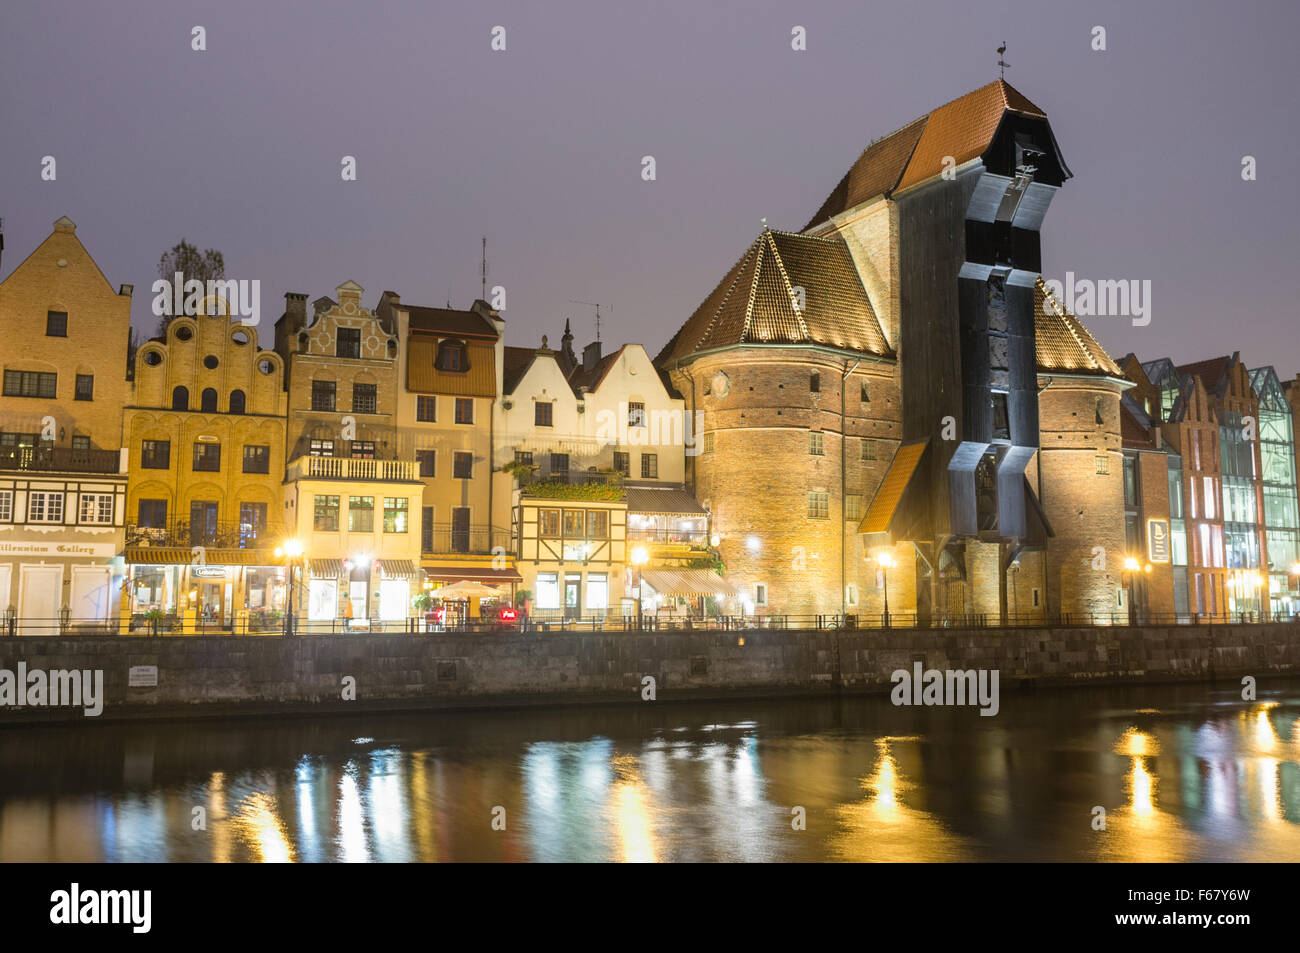 Heritage Crane Gdansk High Resolution Stock Photography and Images - Alamy